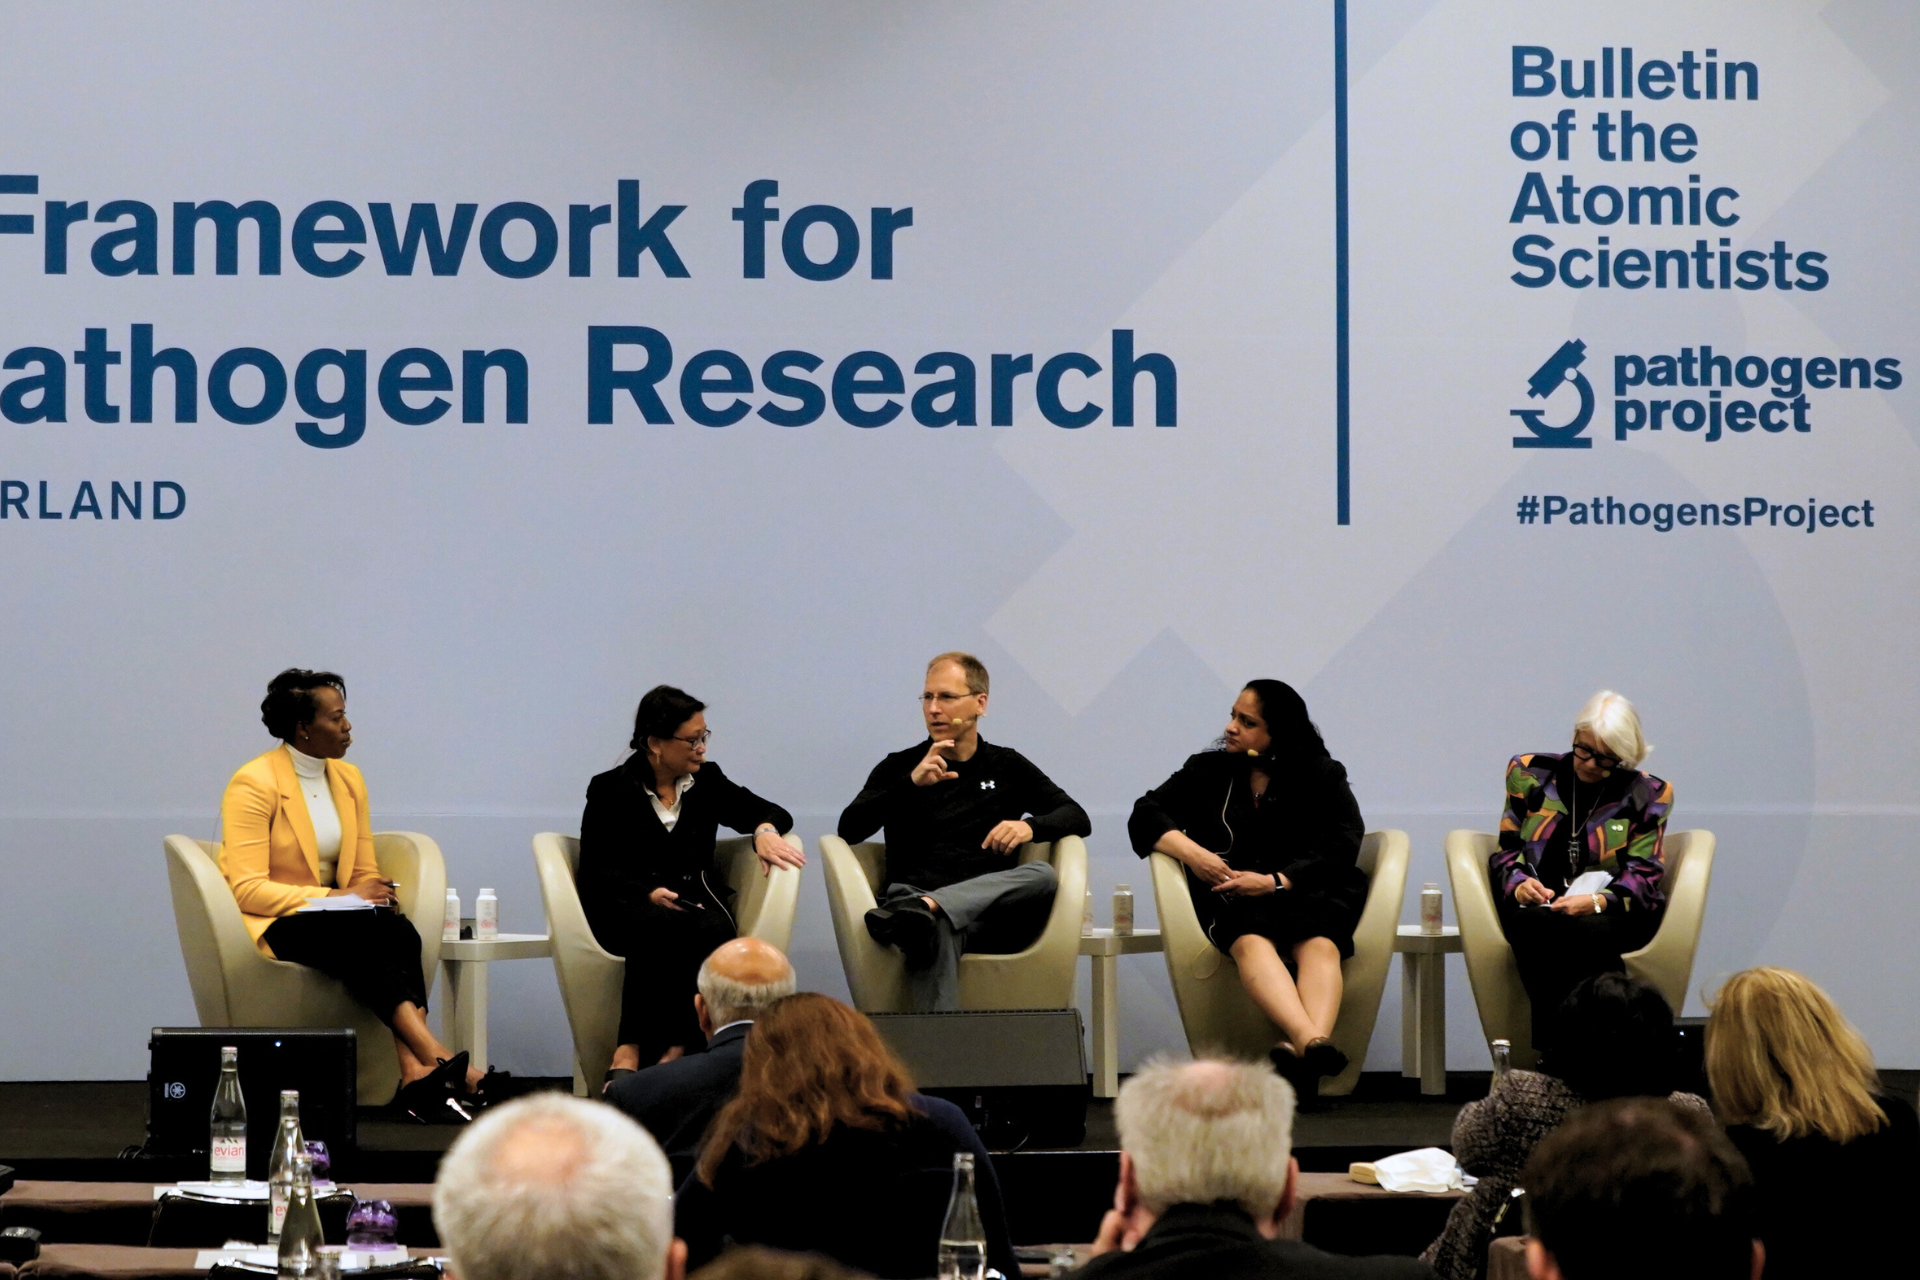 Members of the Science and Security Board join a panel of experts in virology and infectious disease to discuss how the biosecurity landscape is shifting at the Bulletin’s 2023 Pathogens Project Conference in Geneva, Switzerland. From left to right: Science and Security Board member Suzet McKinney, Director of the High-Level Isolation Unit at the National Centre for Infectious Disease Poh Lian Lim, Principal Scientist and Director of Virology at the NIH/NIAID/Integrated Research Facility Jens Kuhn, Science and Security Board member Asha George, and Distinguished Research Professor at Dalhousie University Françoise Baylis.